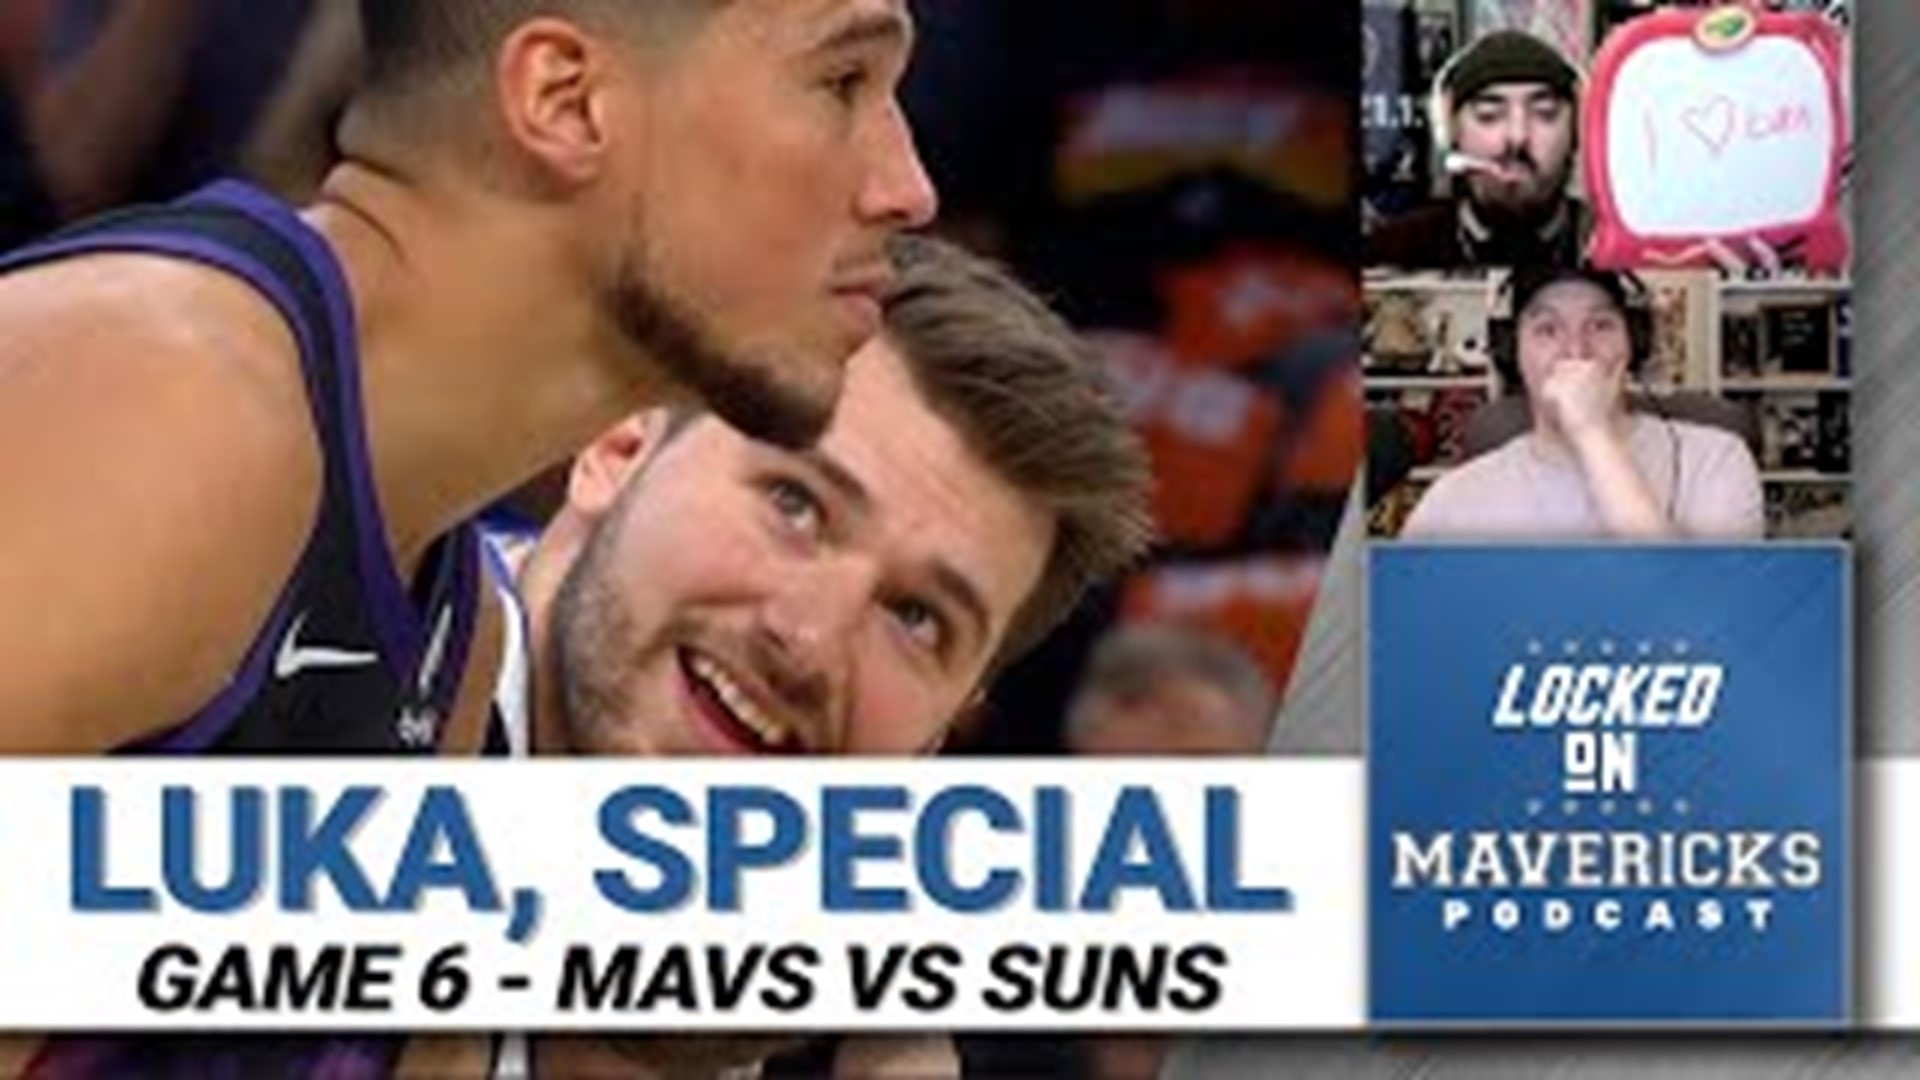 Luka Doncic and the Dallas Mavericks forced a Game 7 against the #1 seeded Phoneix Suns in dominating fashion.